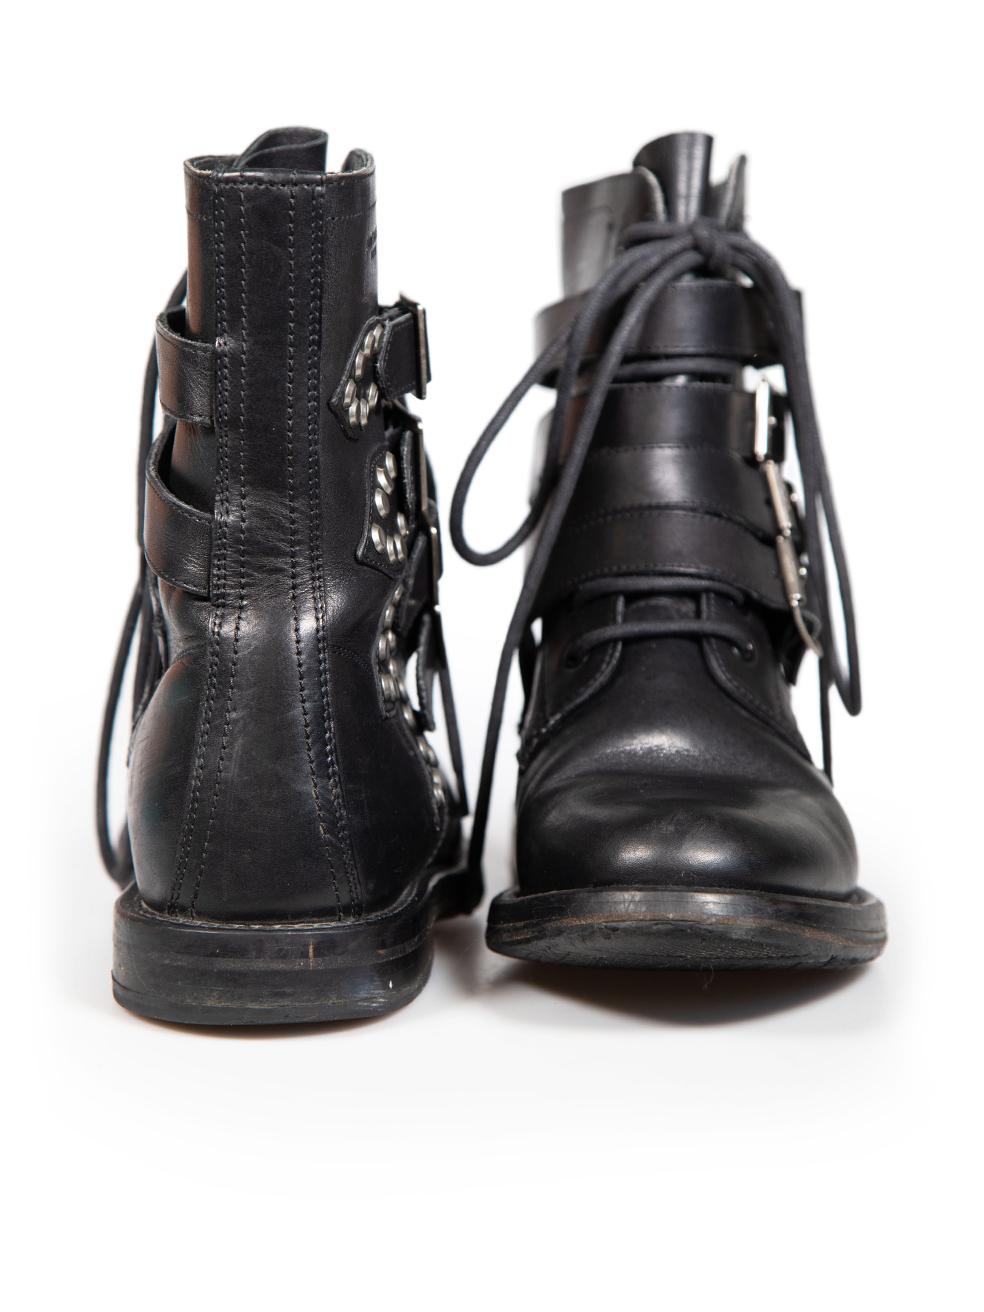 Saint Laurent Black Leather Studded Combat Boots Size IT 39.5 In Good Condition For Sale In London, GB